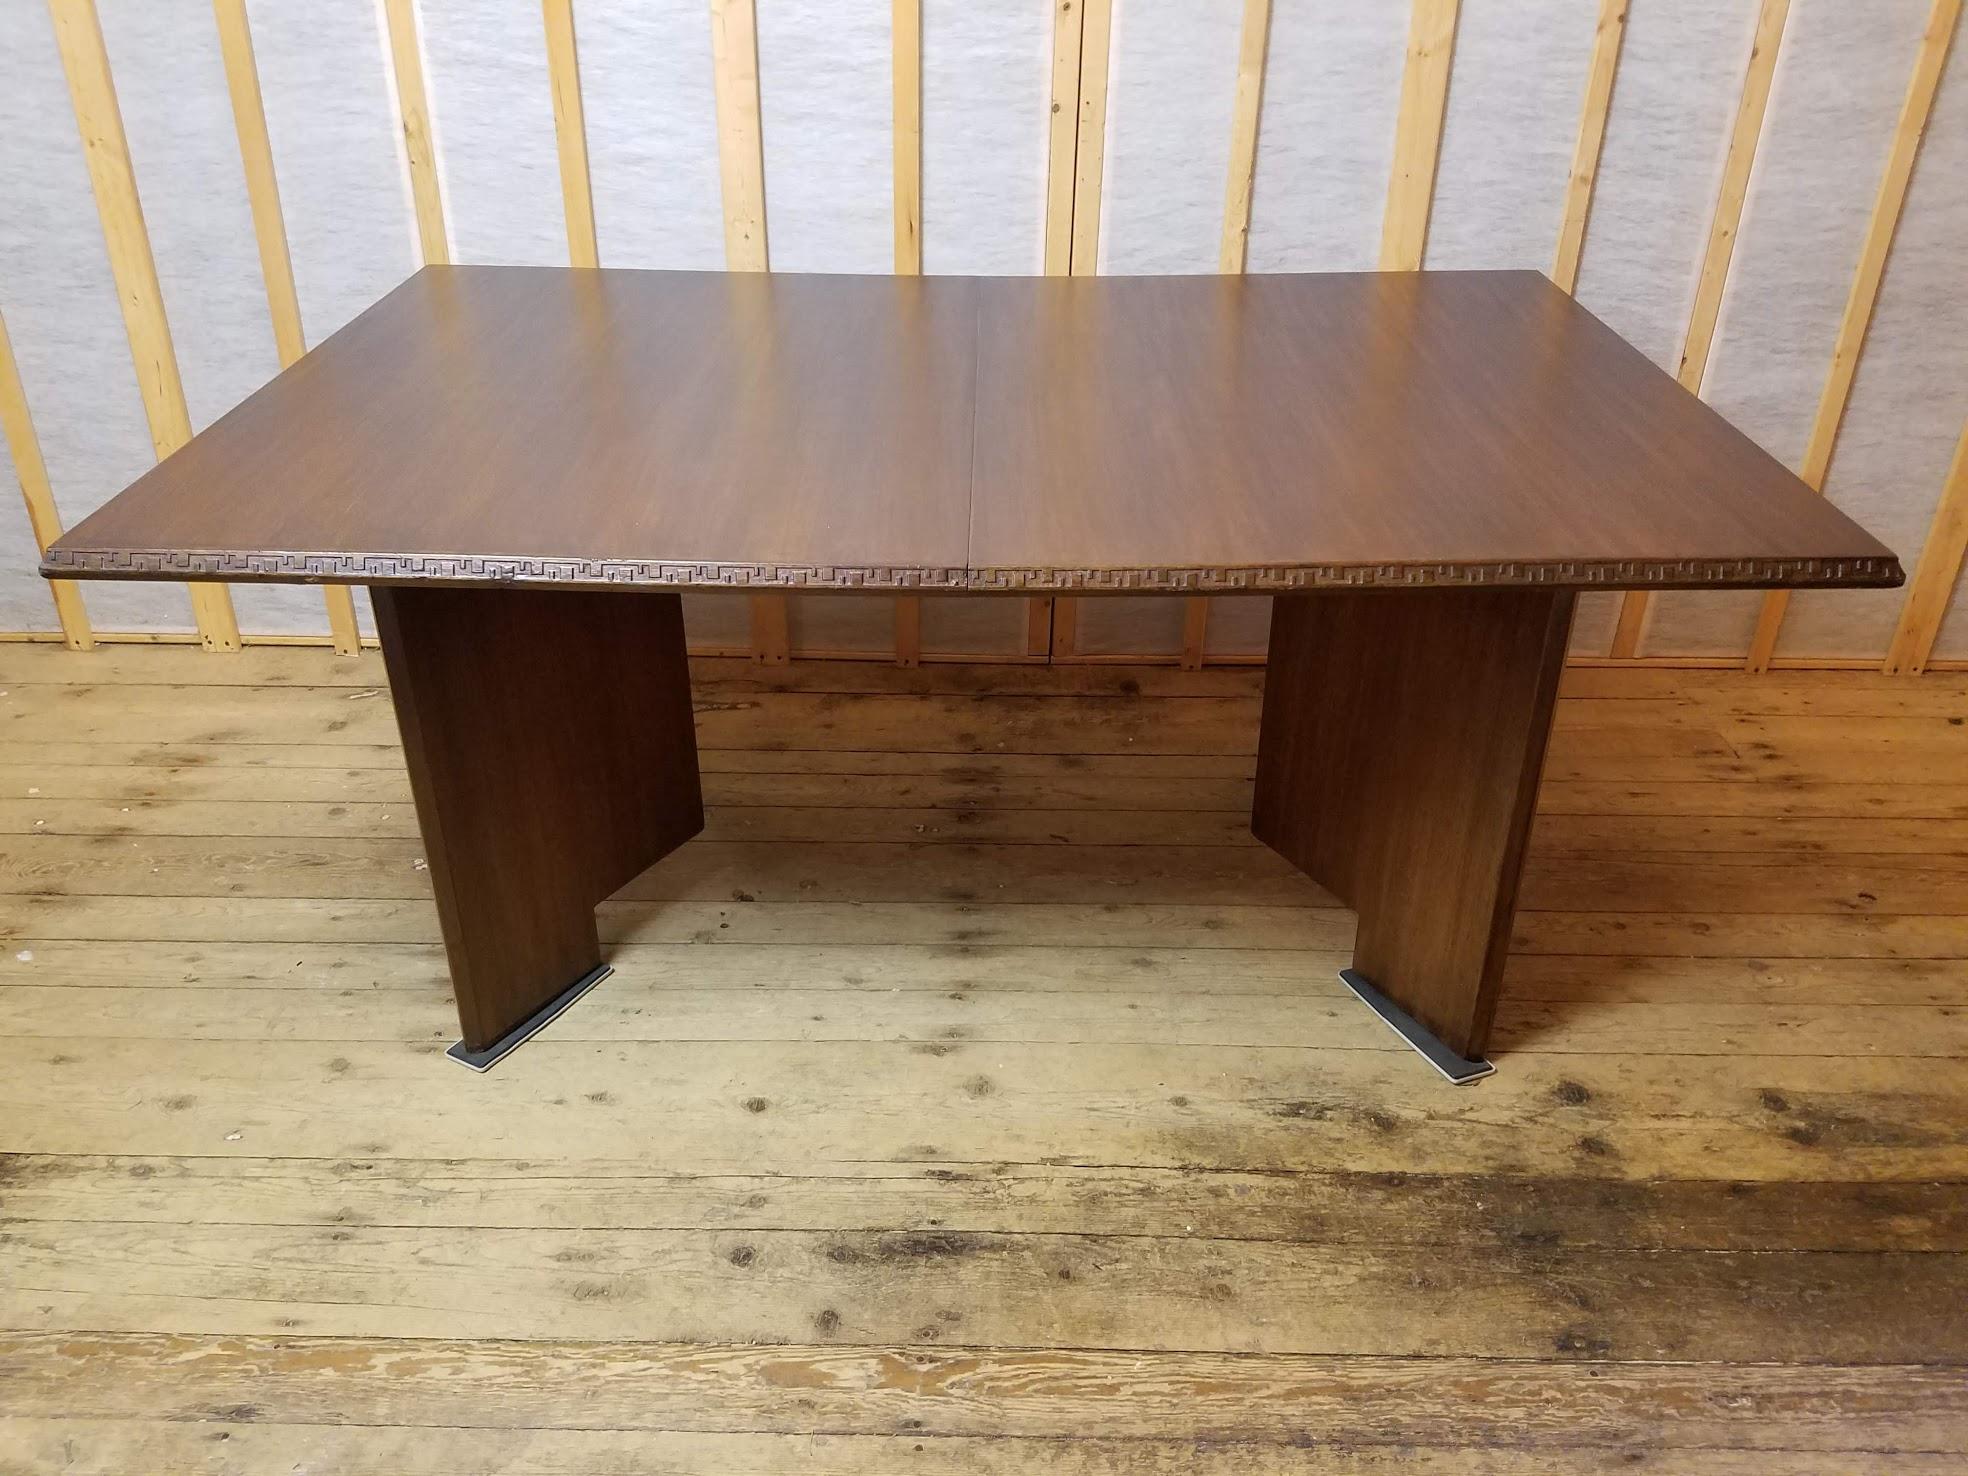 A mahogany dining table designed by Frank Lloyd Wright as part of his Taliesin line of furniture manufactured by Heritage Henredon between 1955-1959.
A very versatile table with (two) 18 inch leaves thus extending the 66 inch table to 102